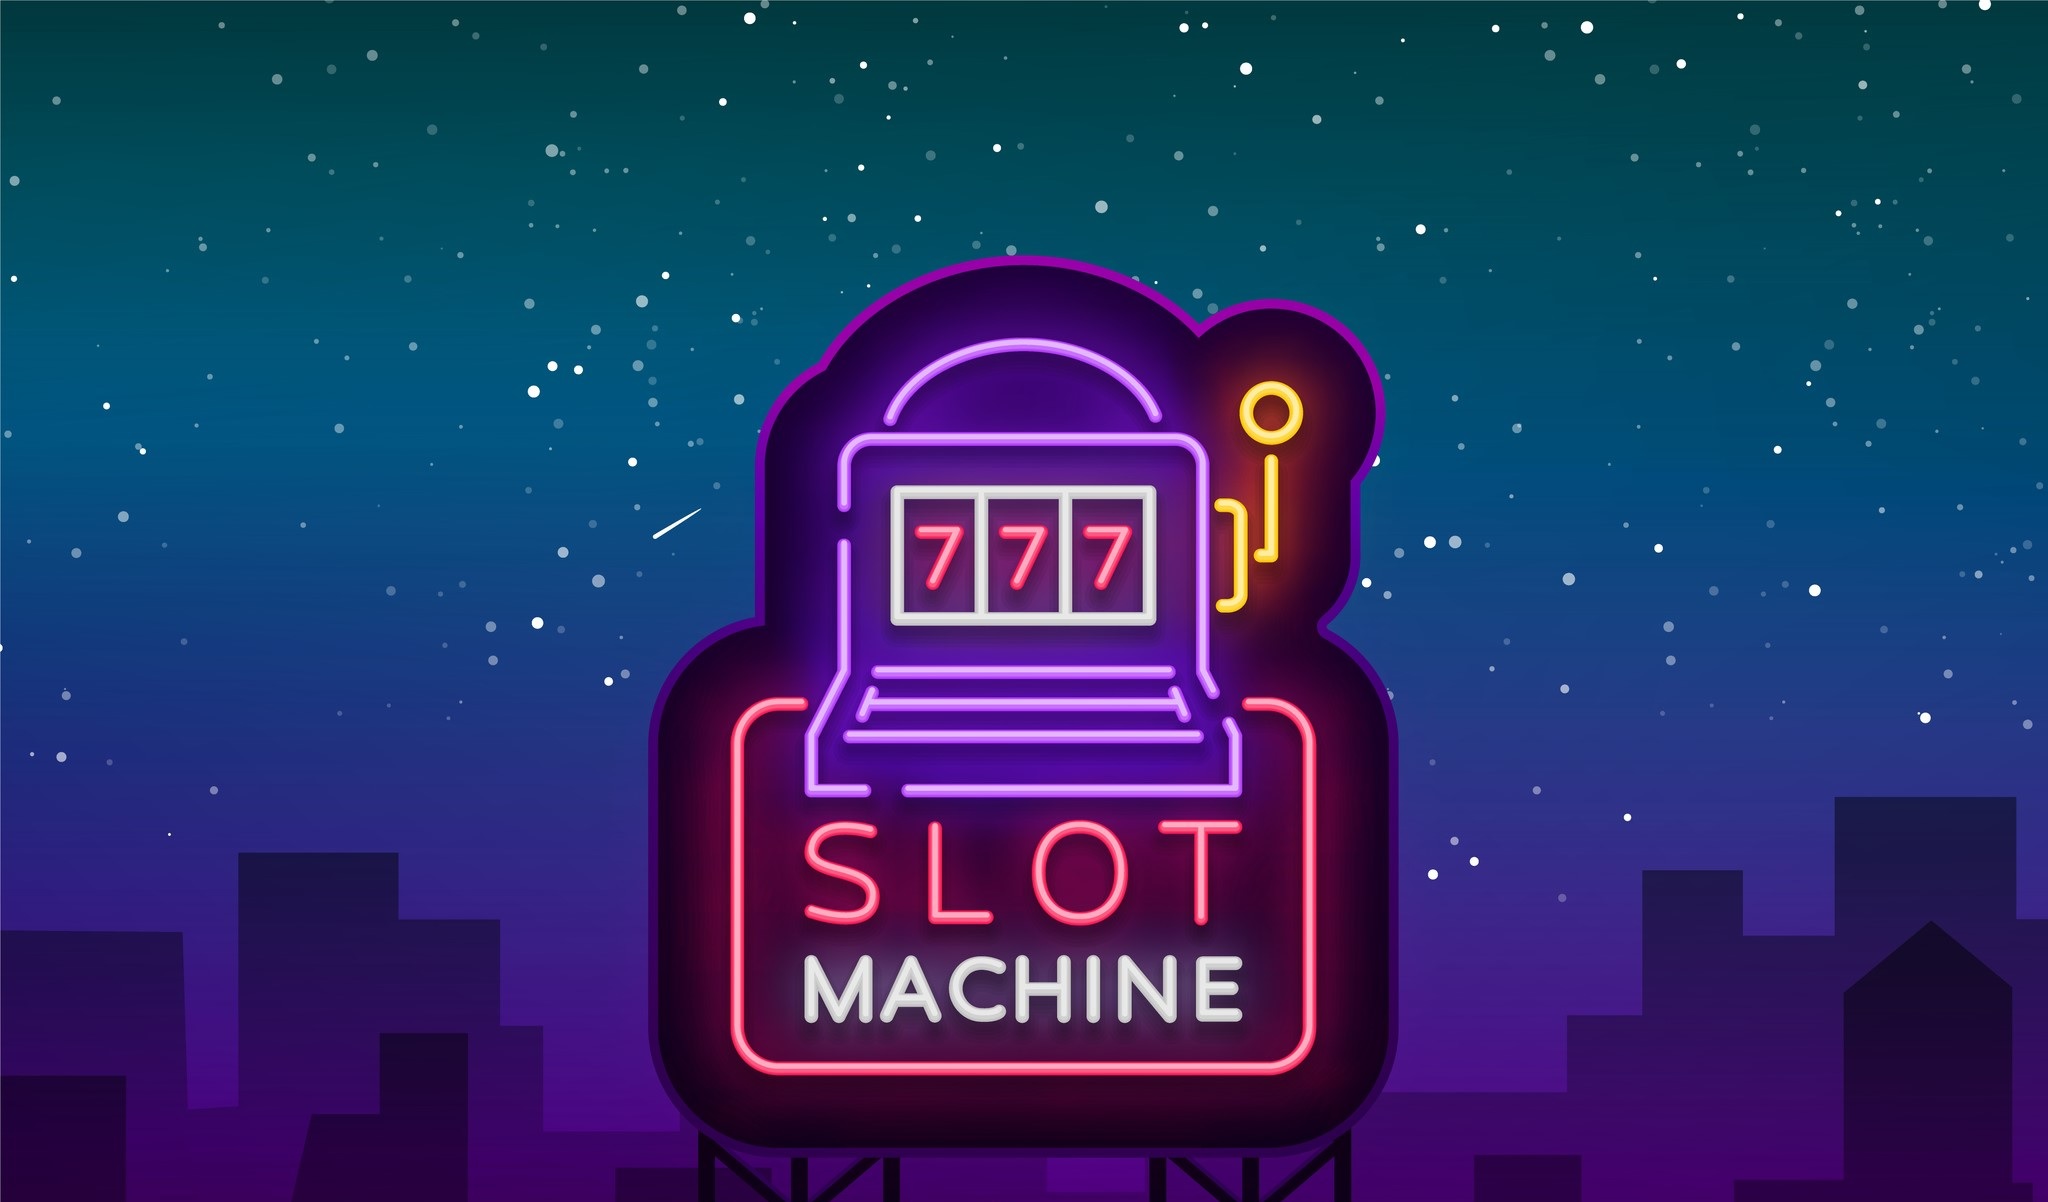 How much money can you win at online slots?